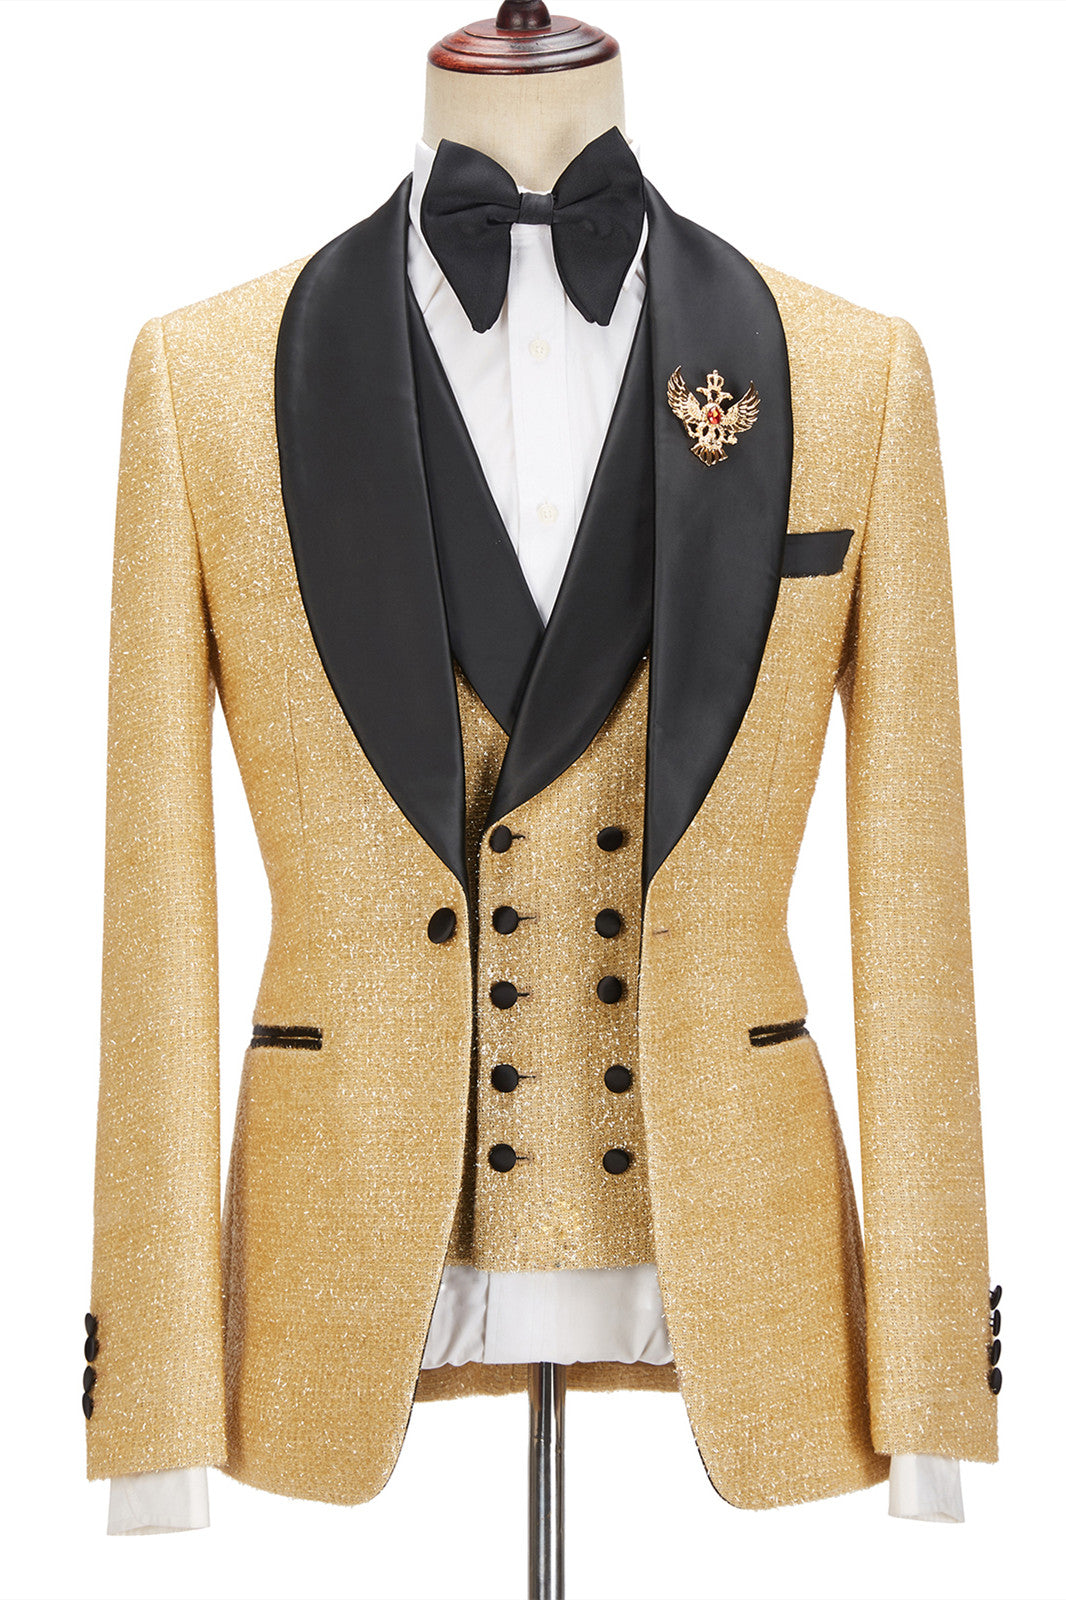 Andrew Sparkly Golden Shawl Lapel Three Piece Men Suits For Wedding-Wedding Suits-BallBride